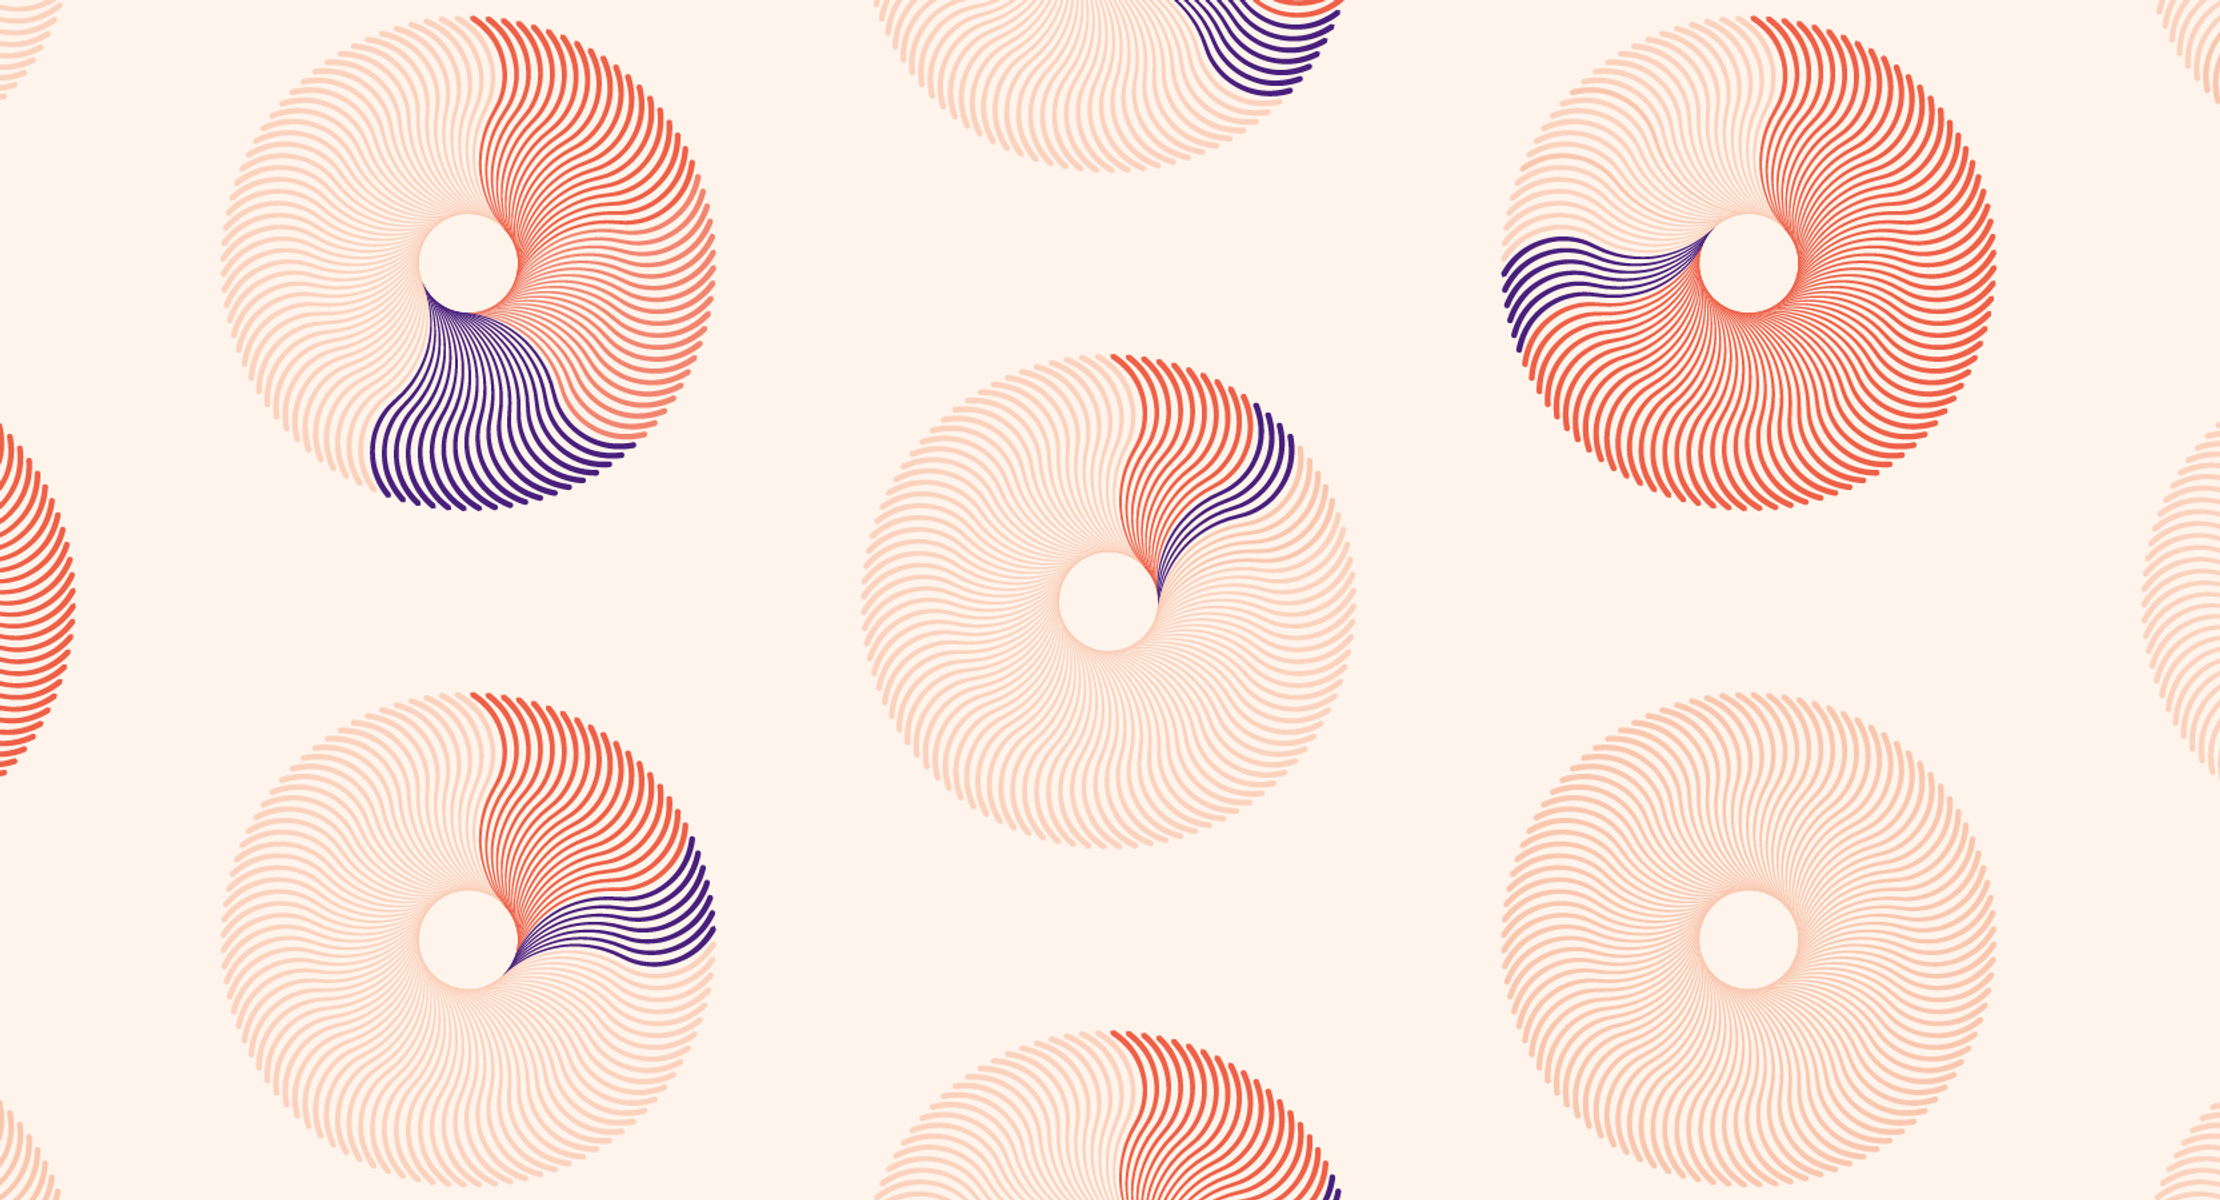 Several abstract circles, each made of several small curved lines. The circles have smaller circular holes cut out in the middle.